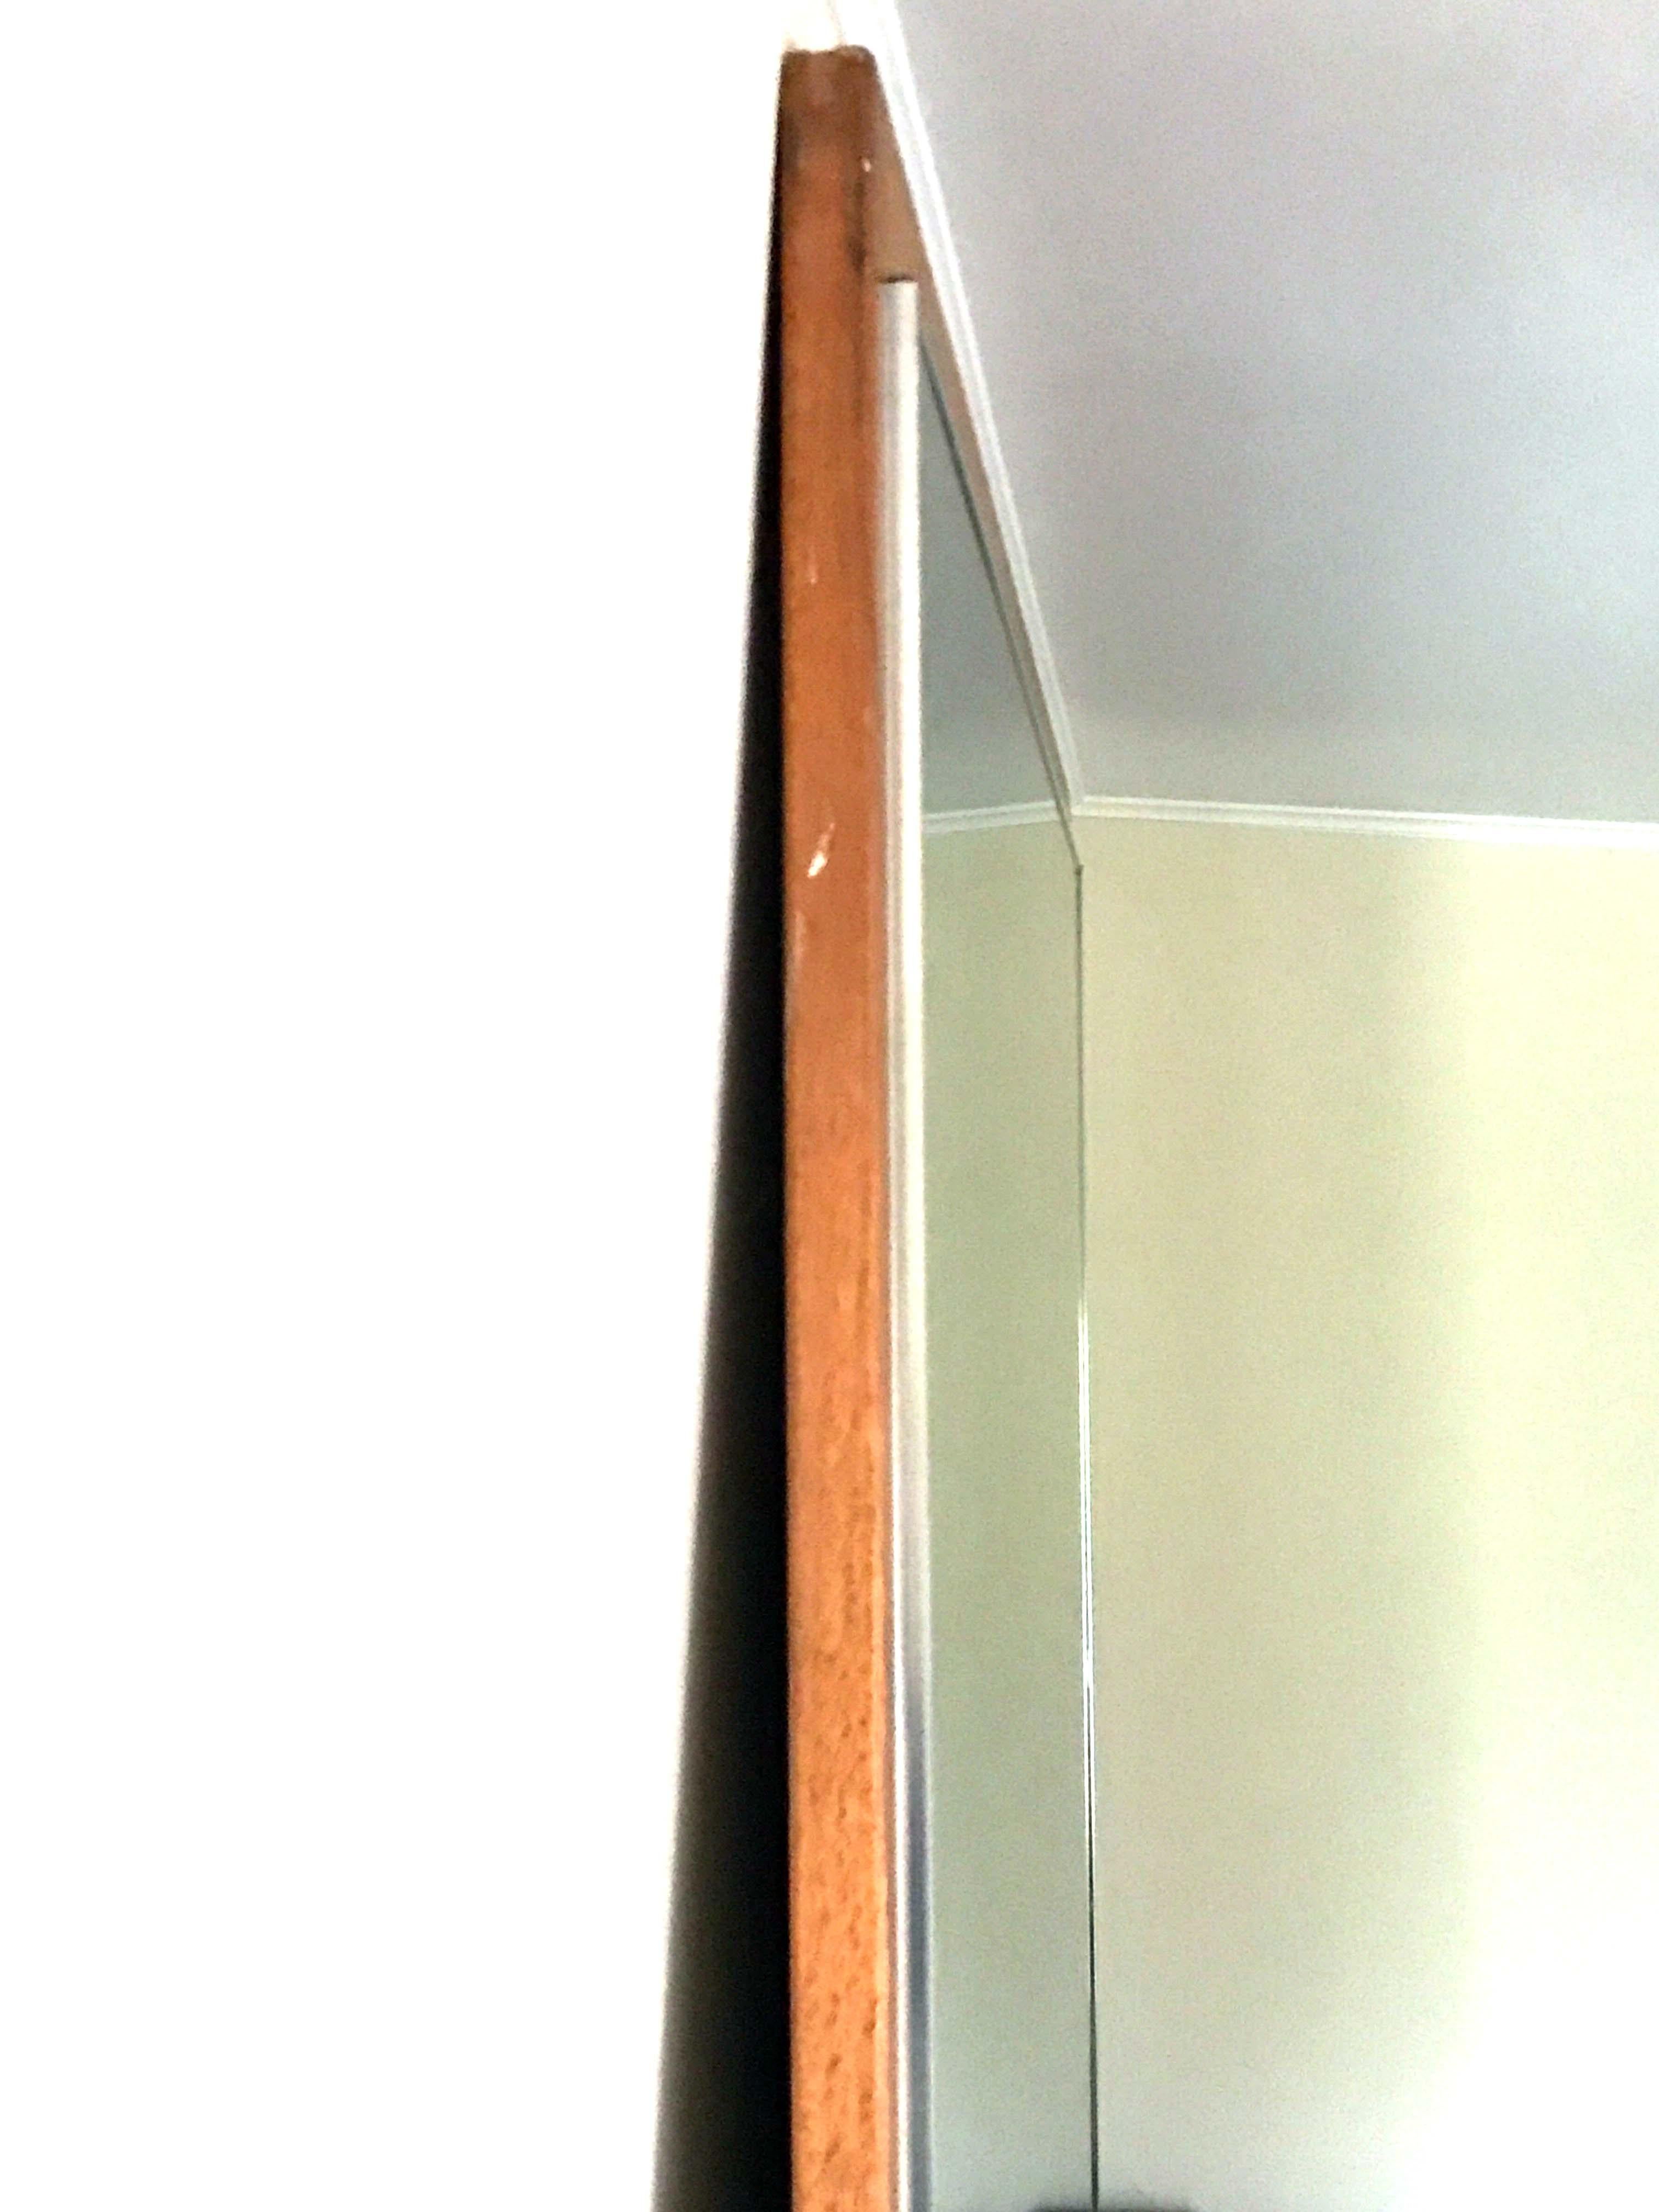 Monumental Mirrored Sliding Door by Mid-Century Modern Architect Bud Oglesby For Sale 3